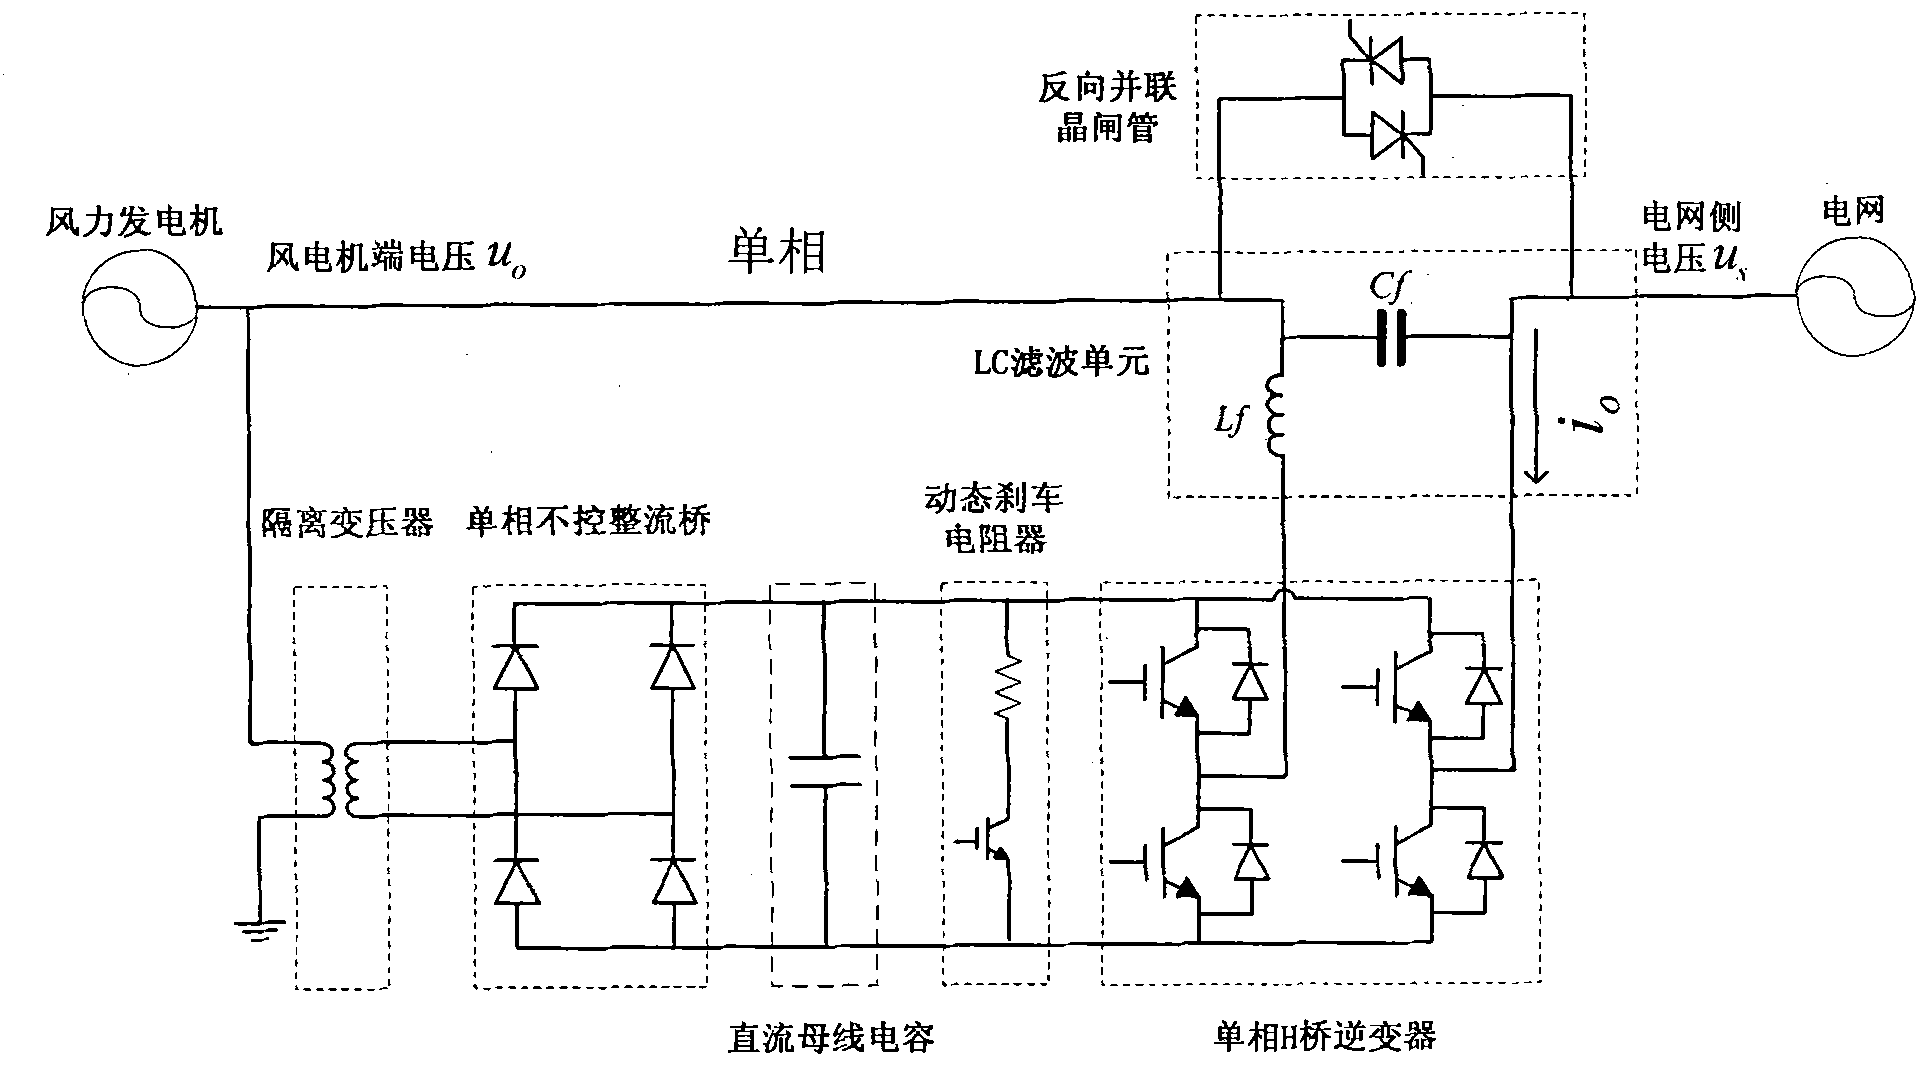 Dynamic voltage stabilizer for assisting wind driven generator in realizing low voltage ride through (LVRT)